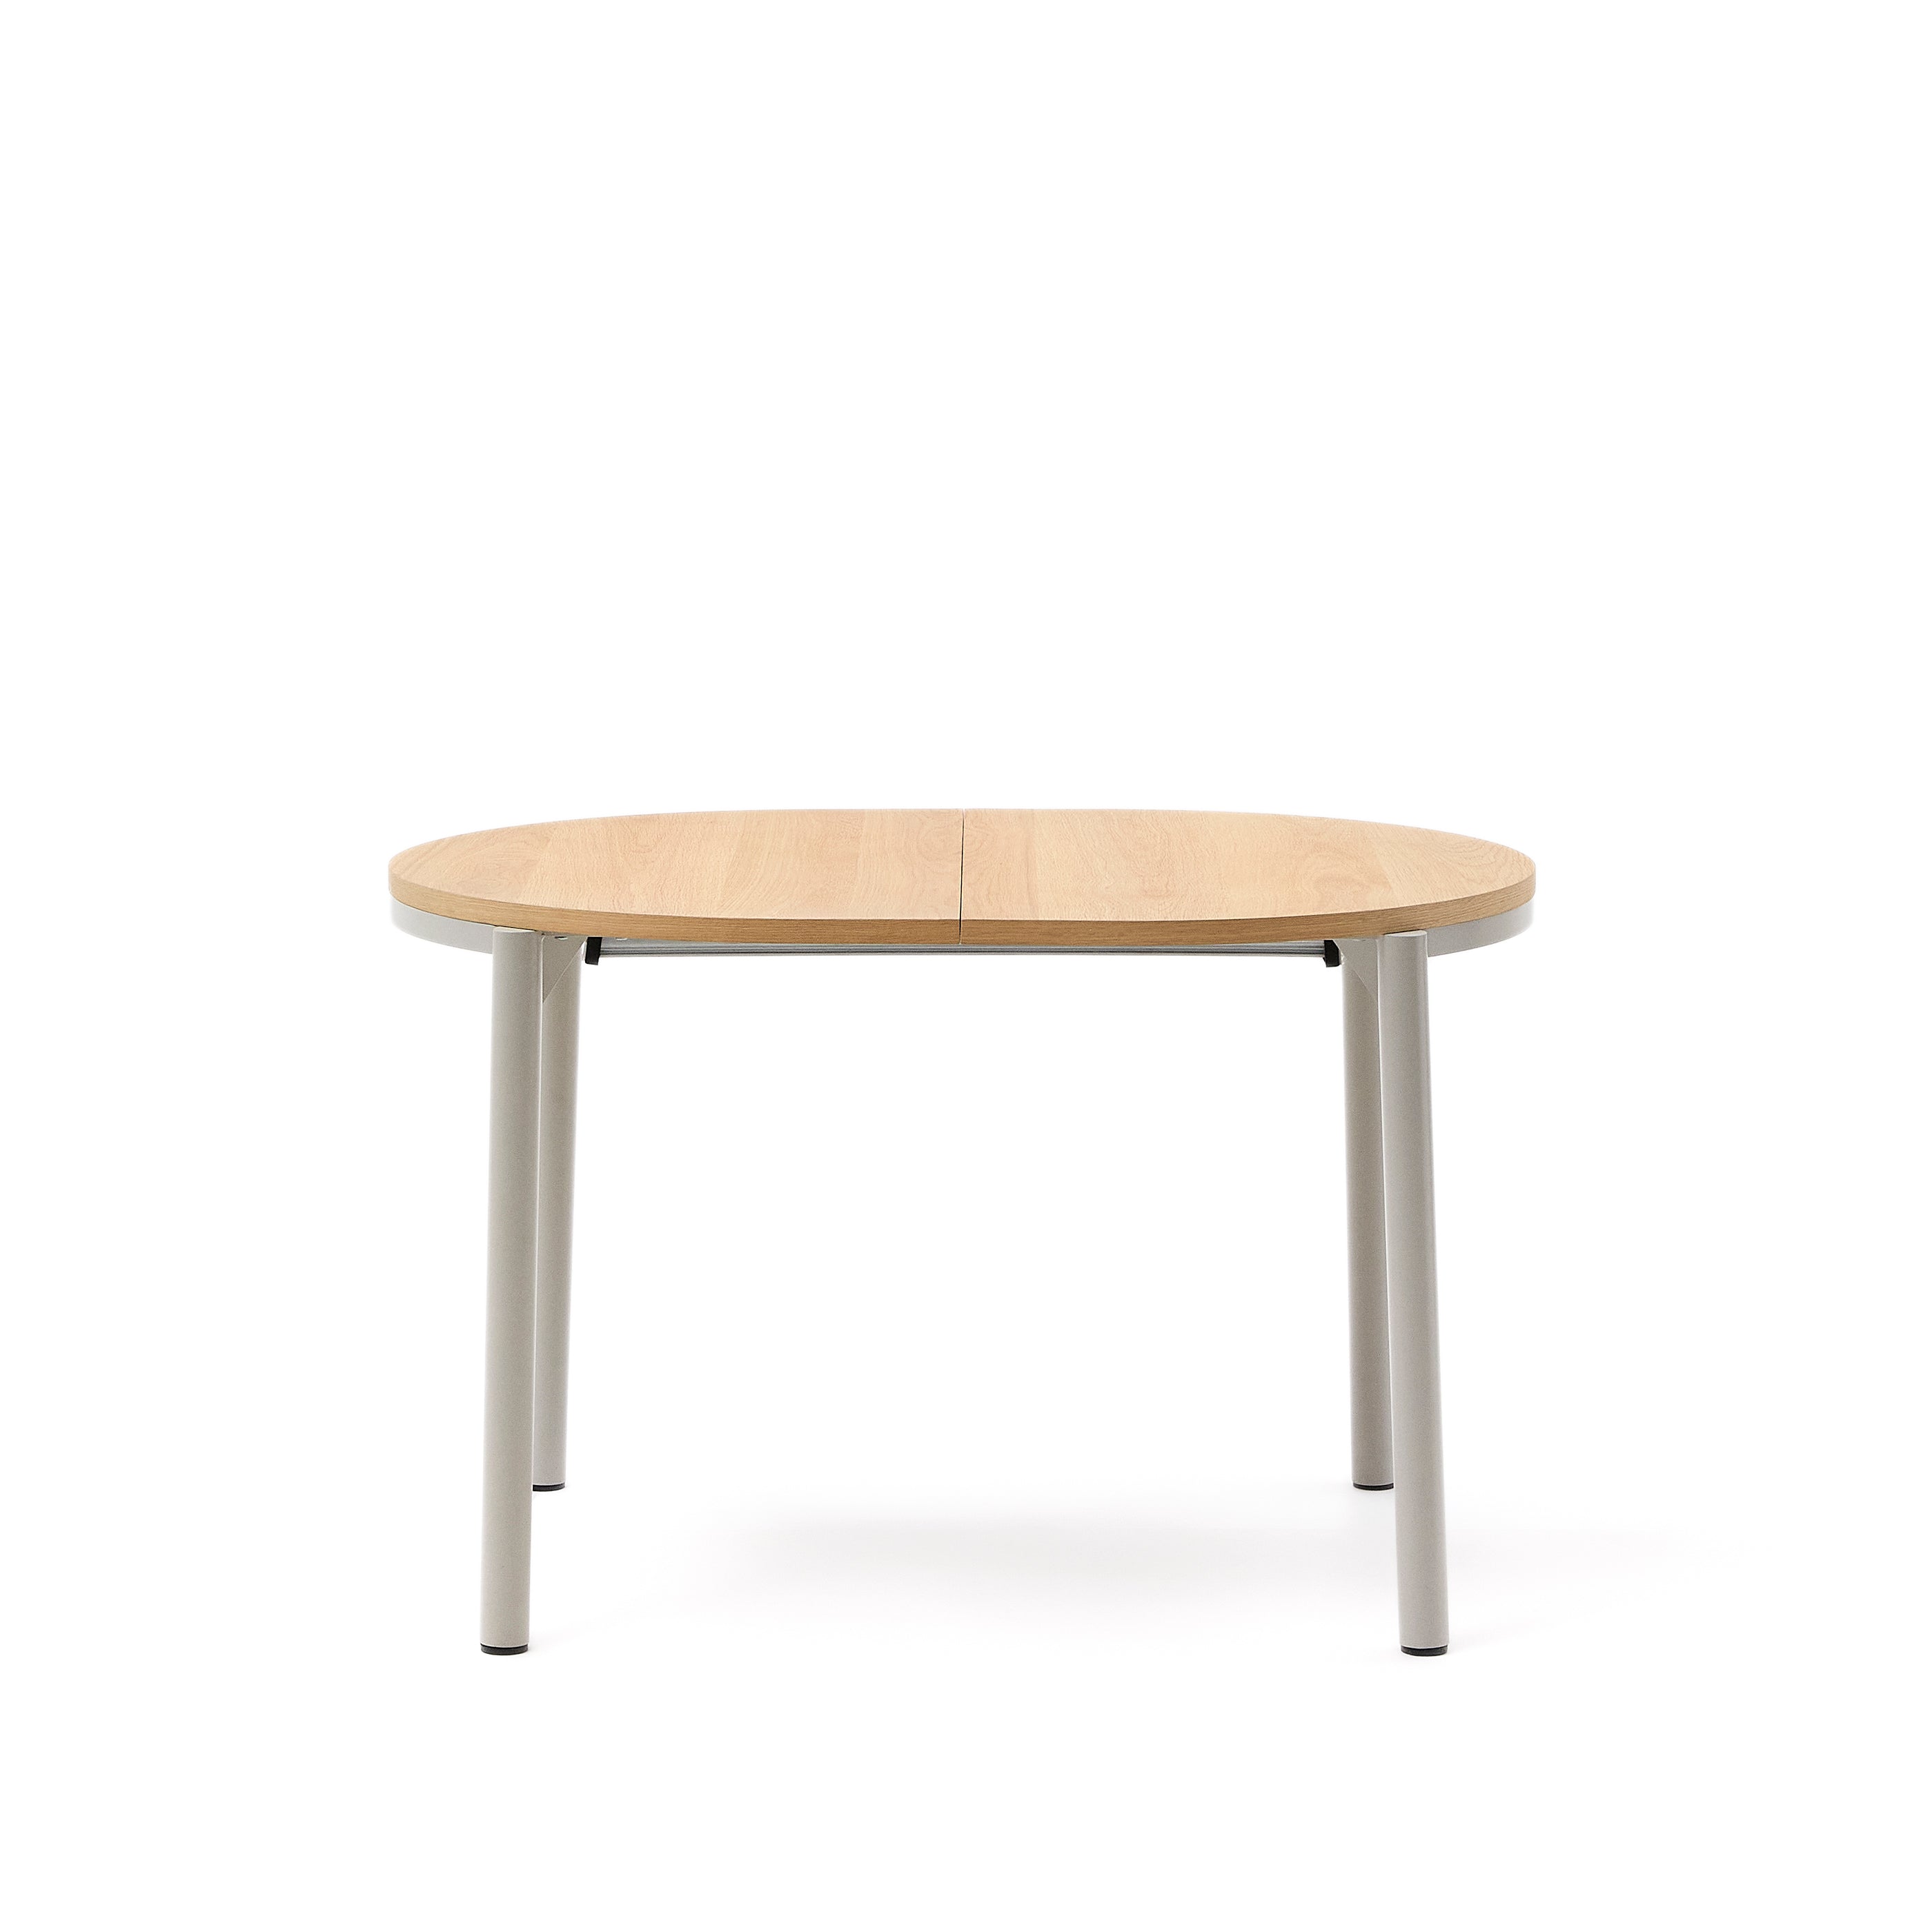 Montuiri round extendable table with oak veneer and gray finished steel legs, 120(160) x 90 cm